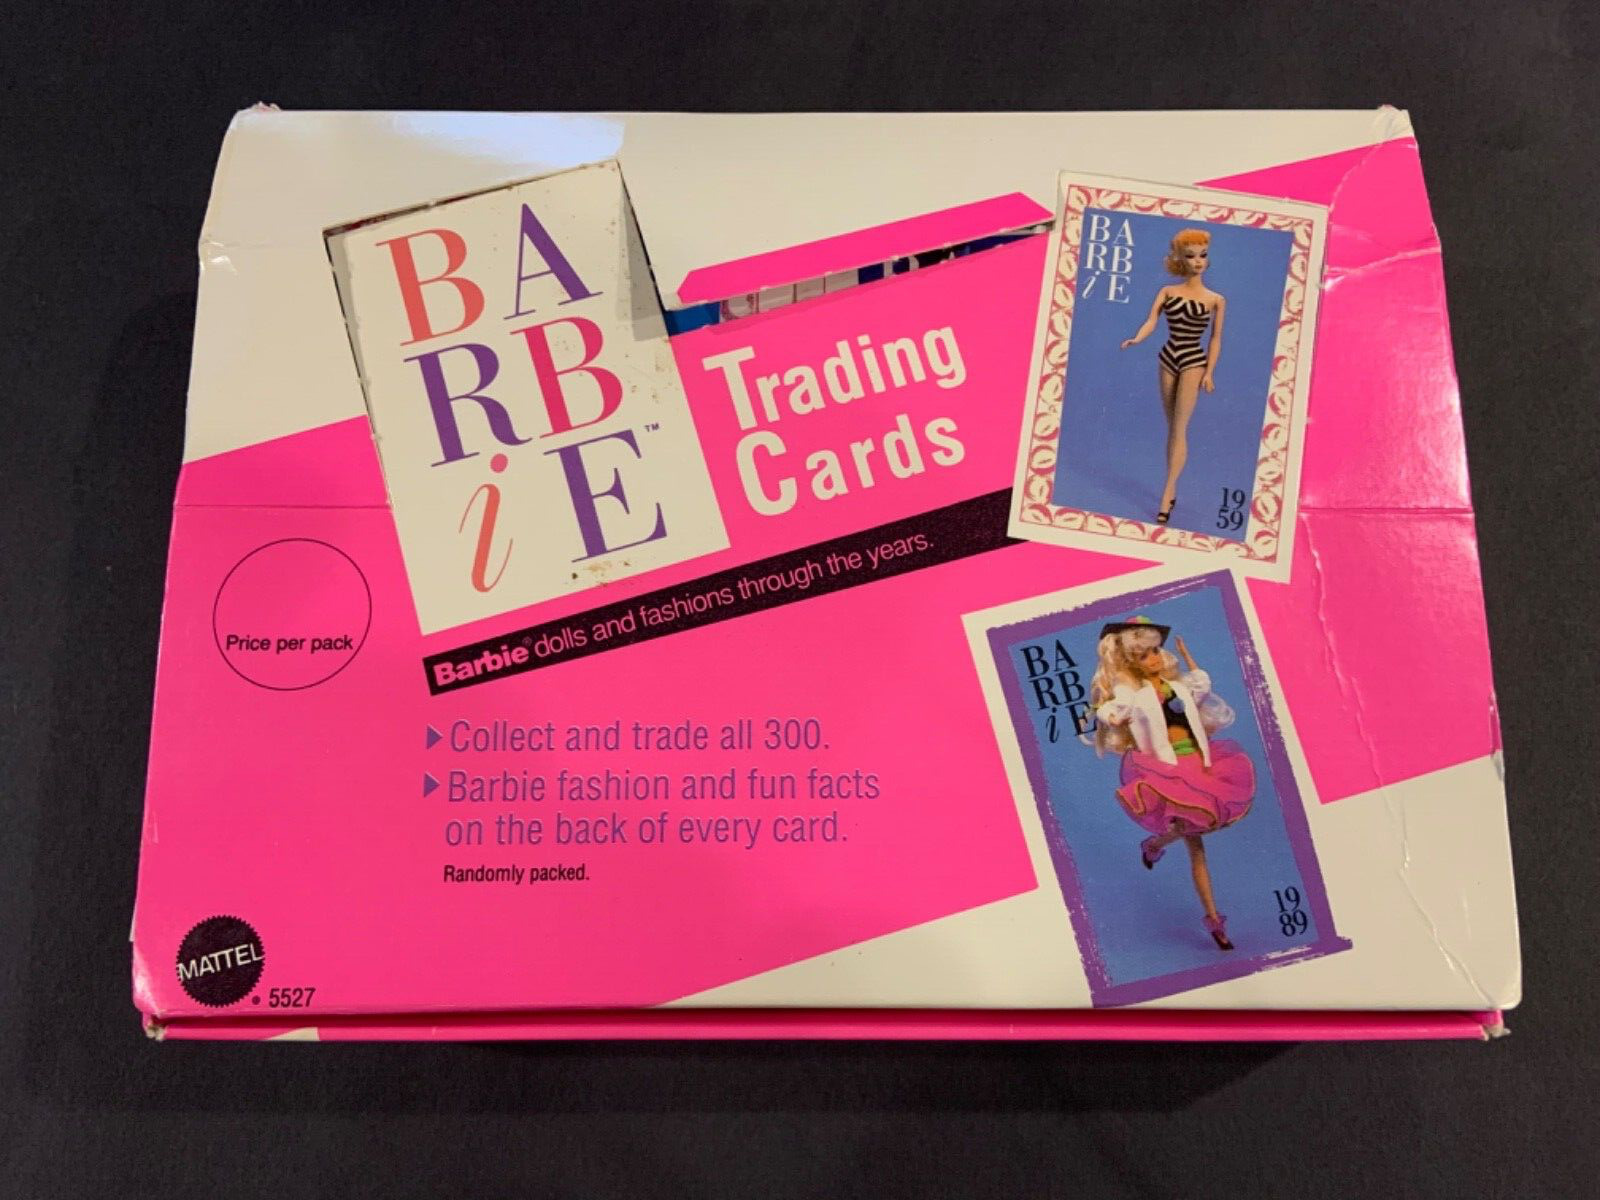 Vintage Barbie Trading Card Lot with Retail Box 301 pcs. 